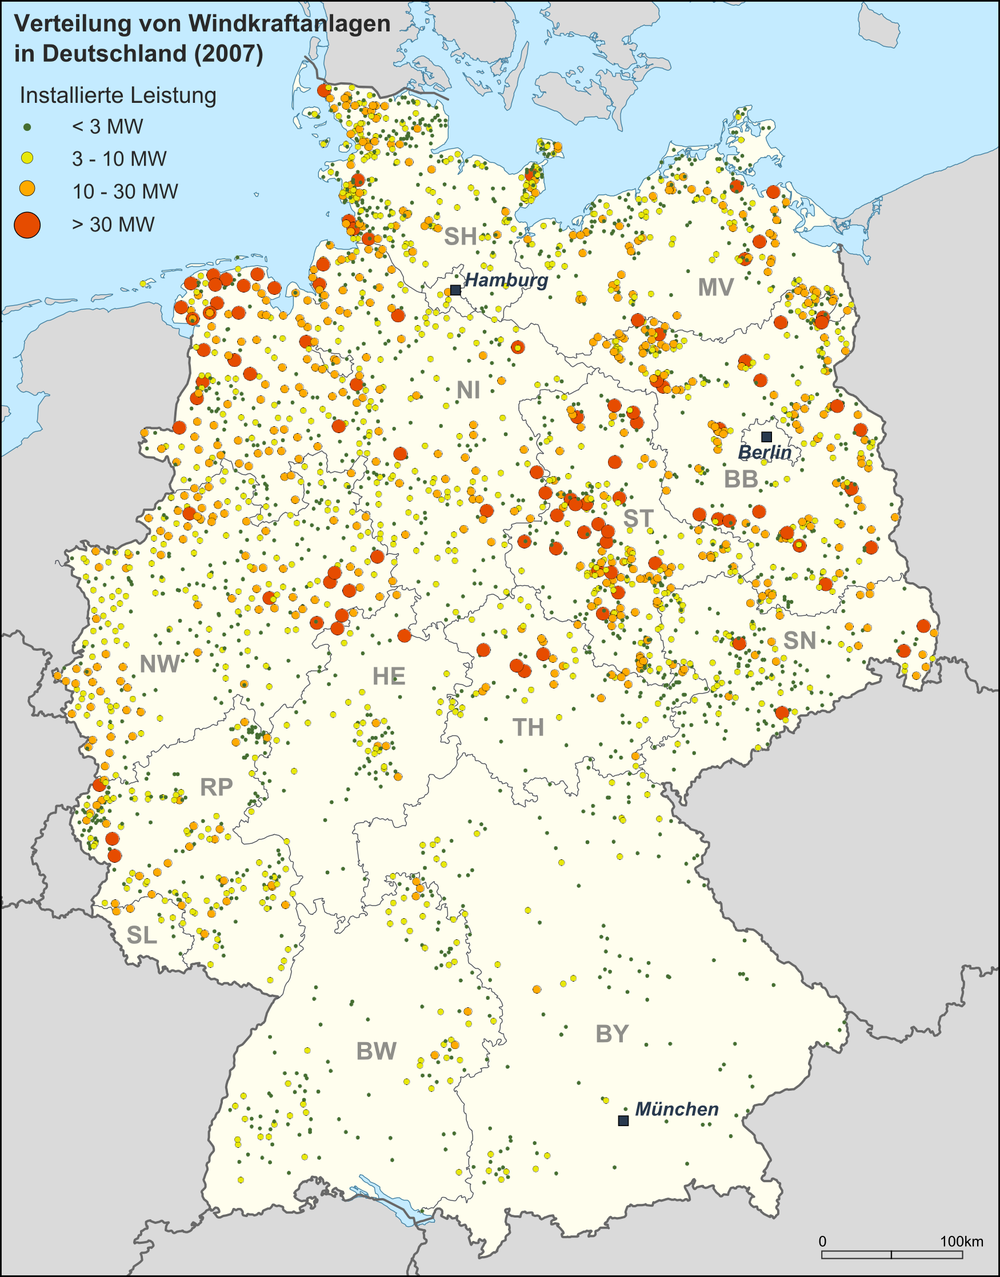 Wind farms in Germany - Full size | Gifex